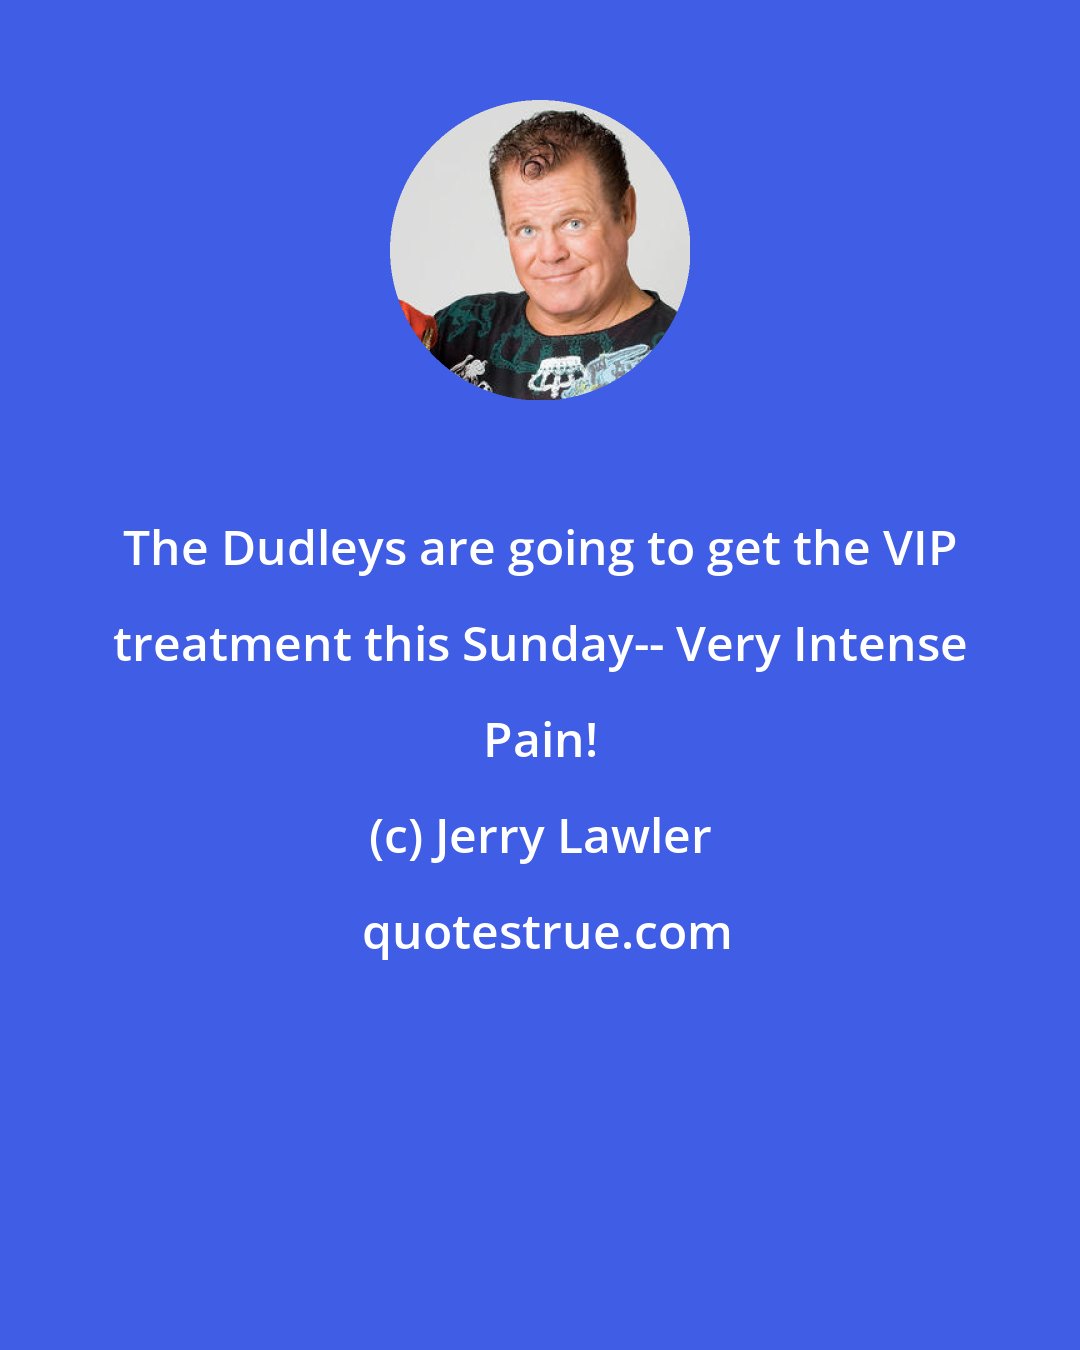 Jerry Lawler: The Dudleys are going to get the VIP treatment this Sunday-- Very Intense Pain!